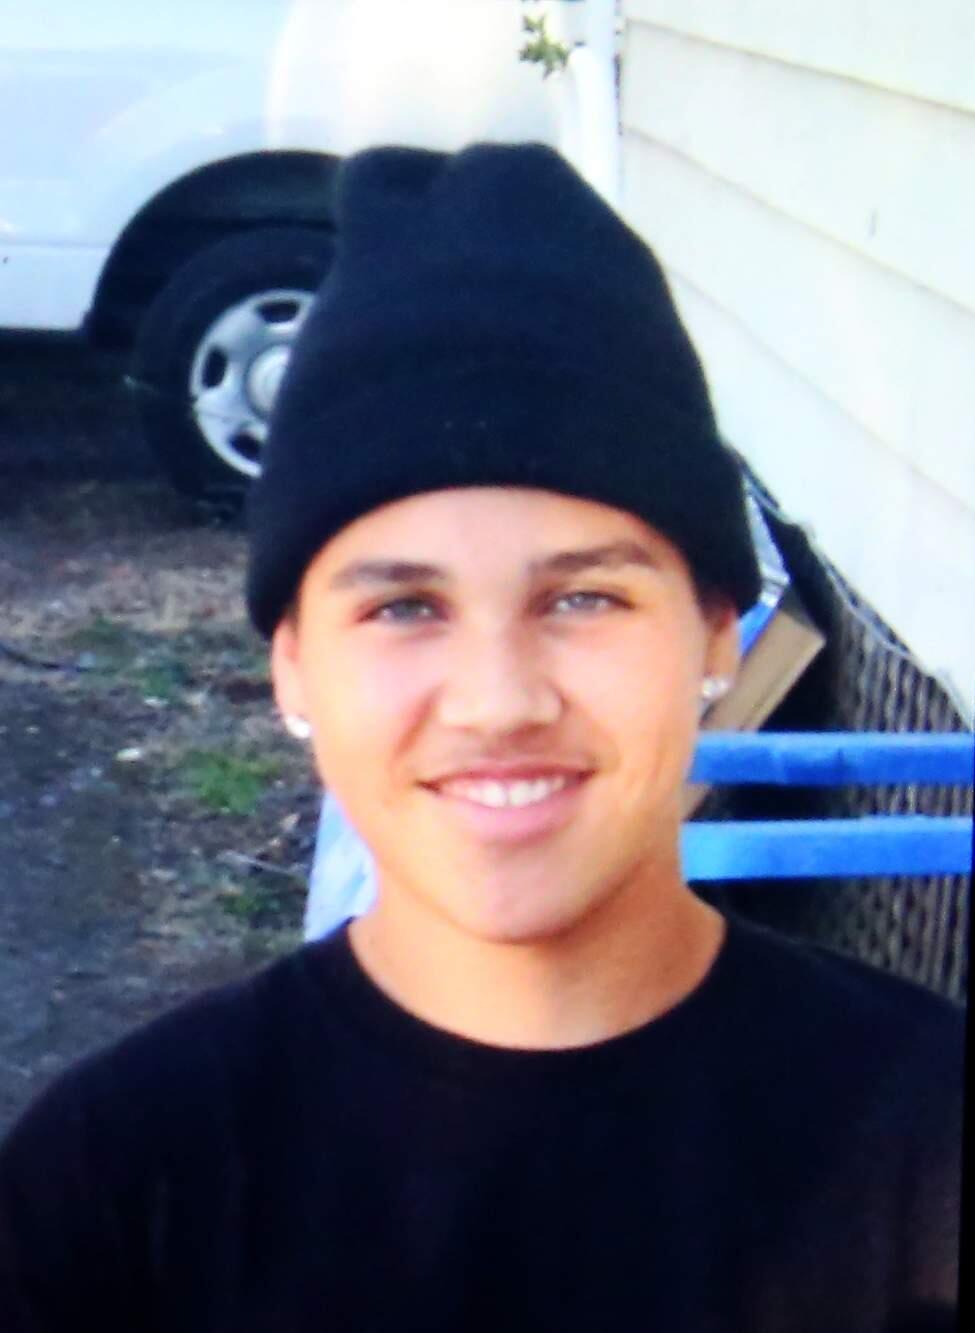 Andy Lopez, 13, was shot dead in October 2013 by Sonoma County Sheriff's Deputy Erick Gelhaus. (PD FILE)